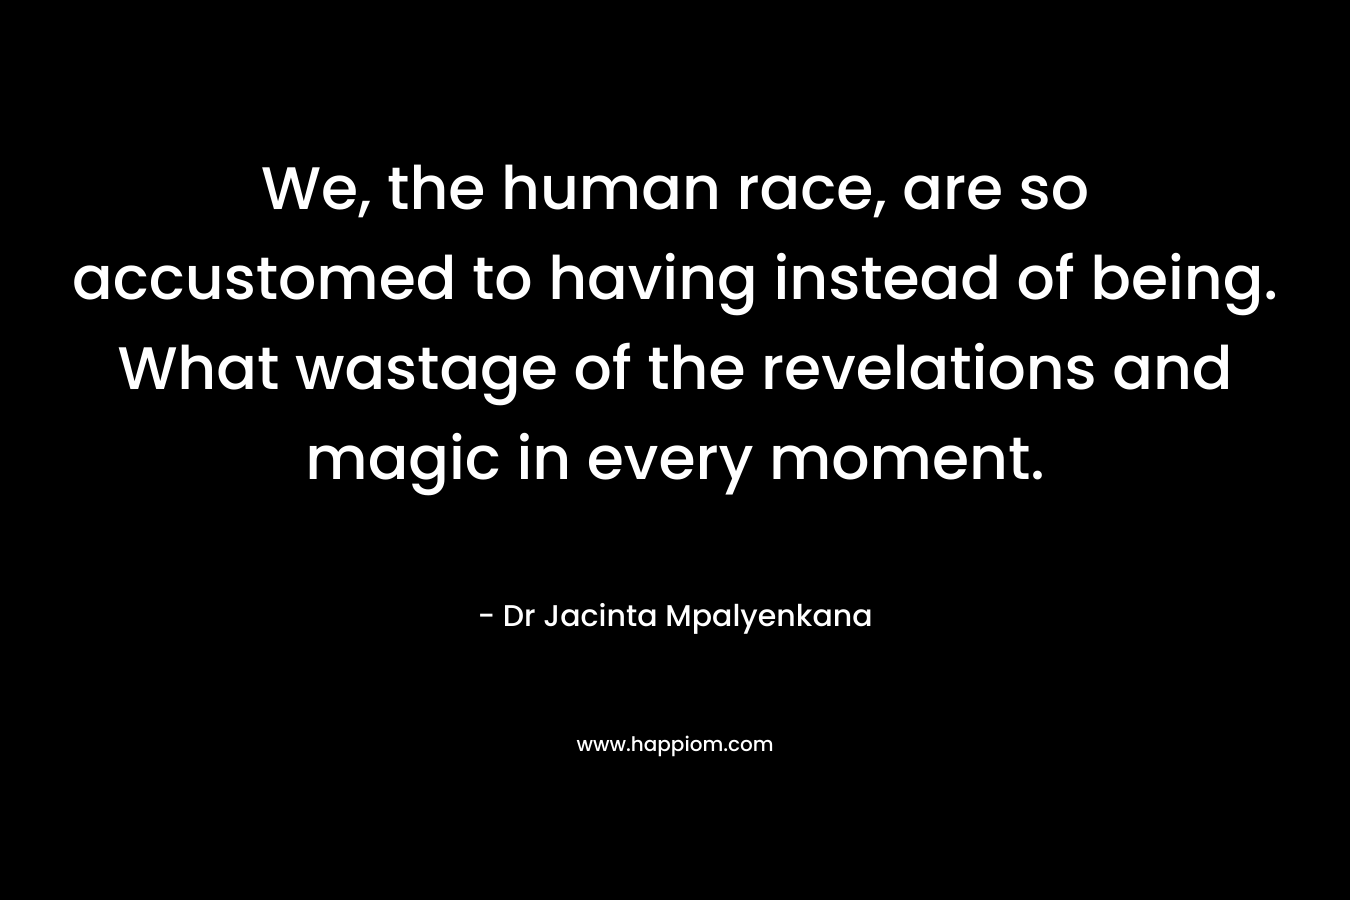 We, the human race, are so accustomed to having instead of being. What wastage of the revelations and magic in every moment.